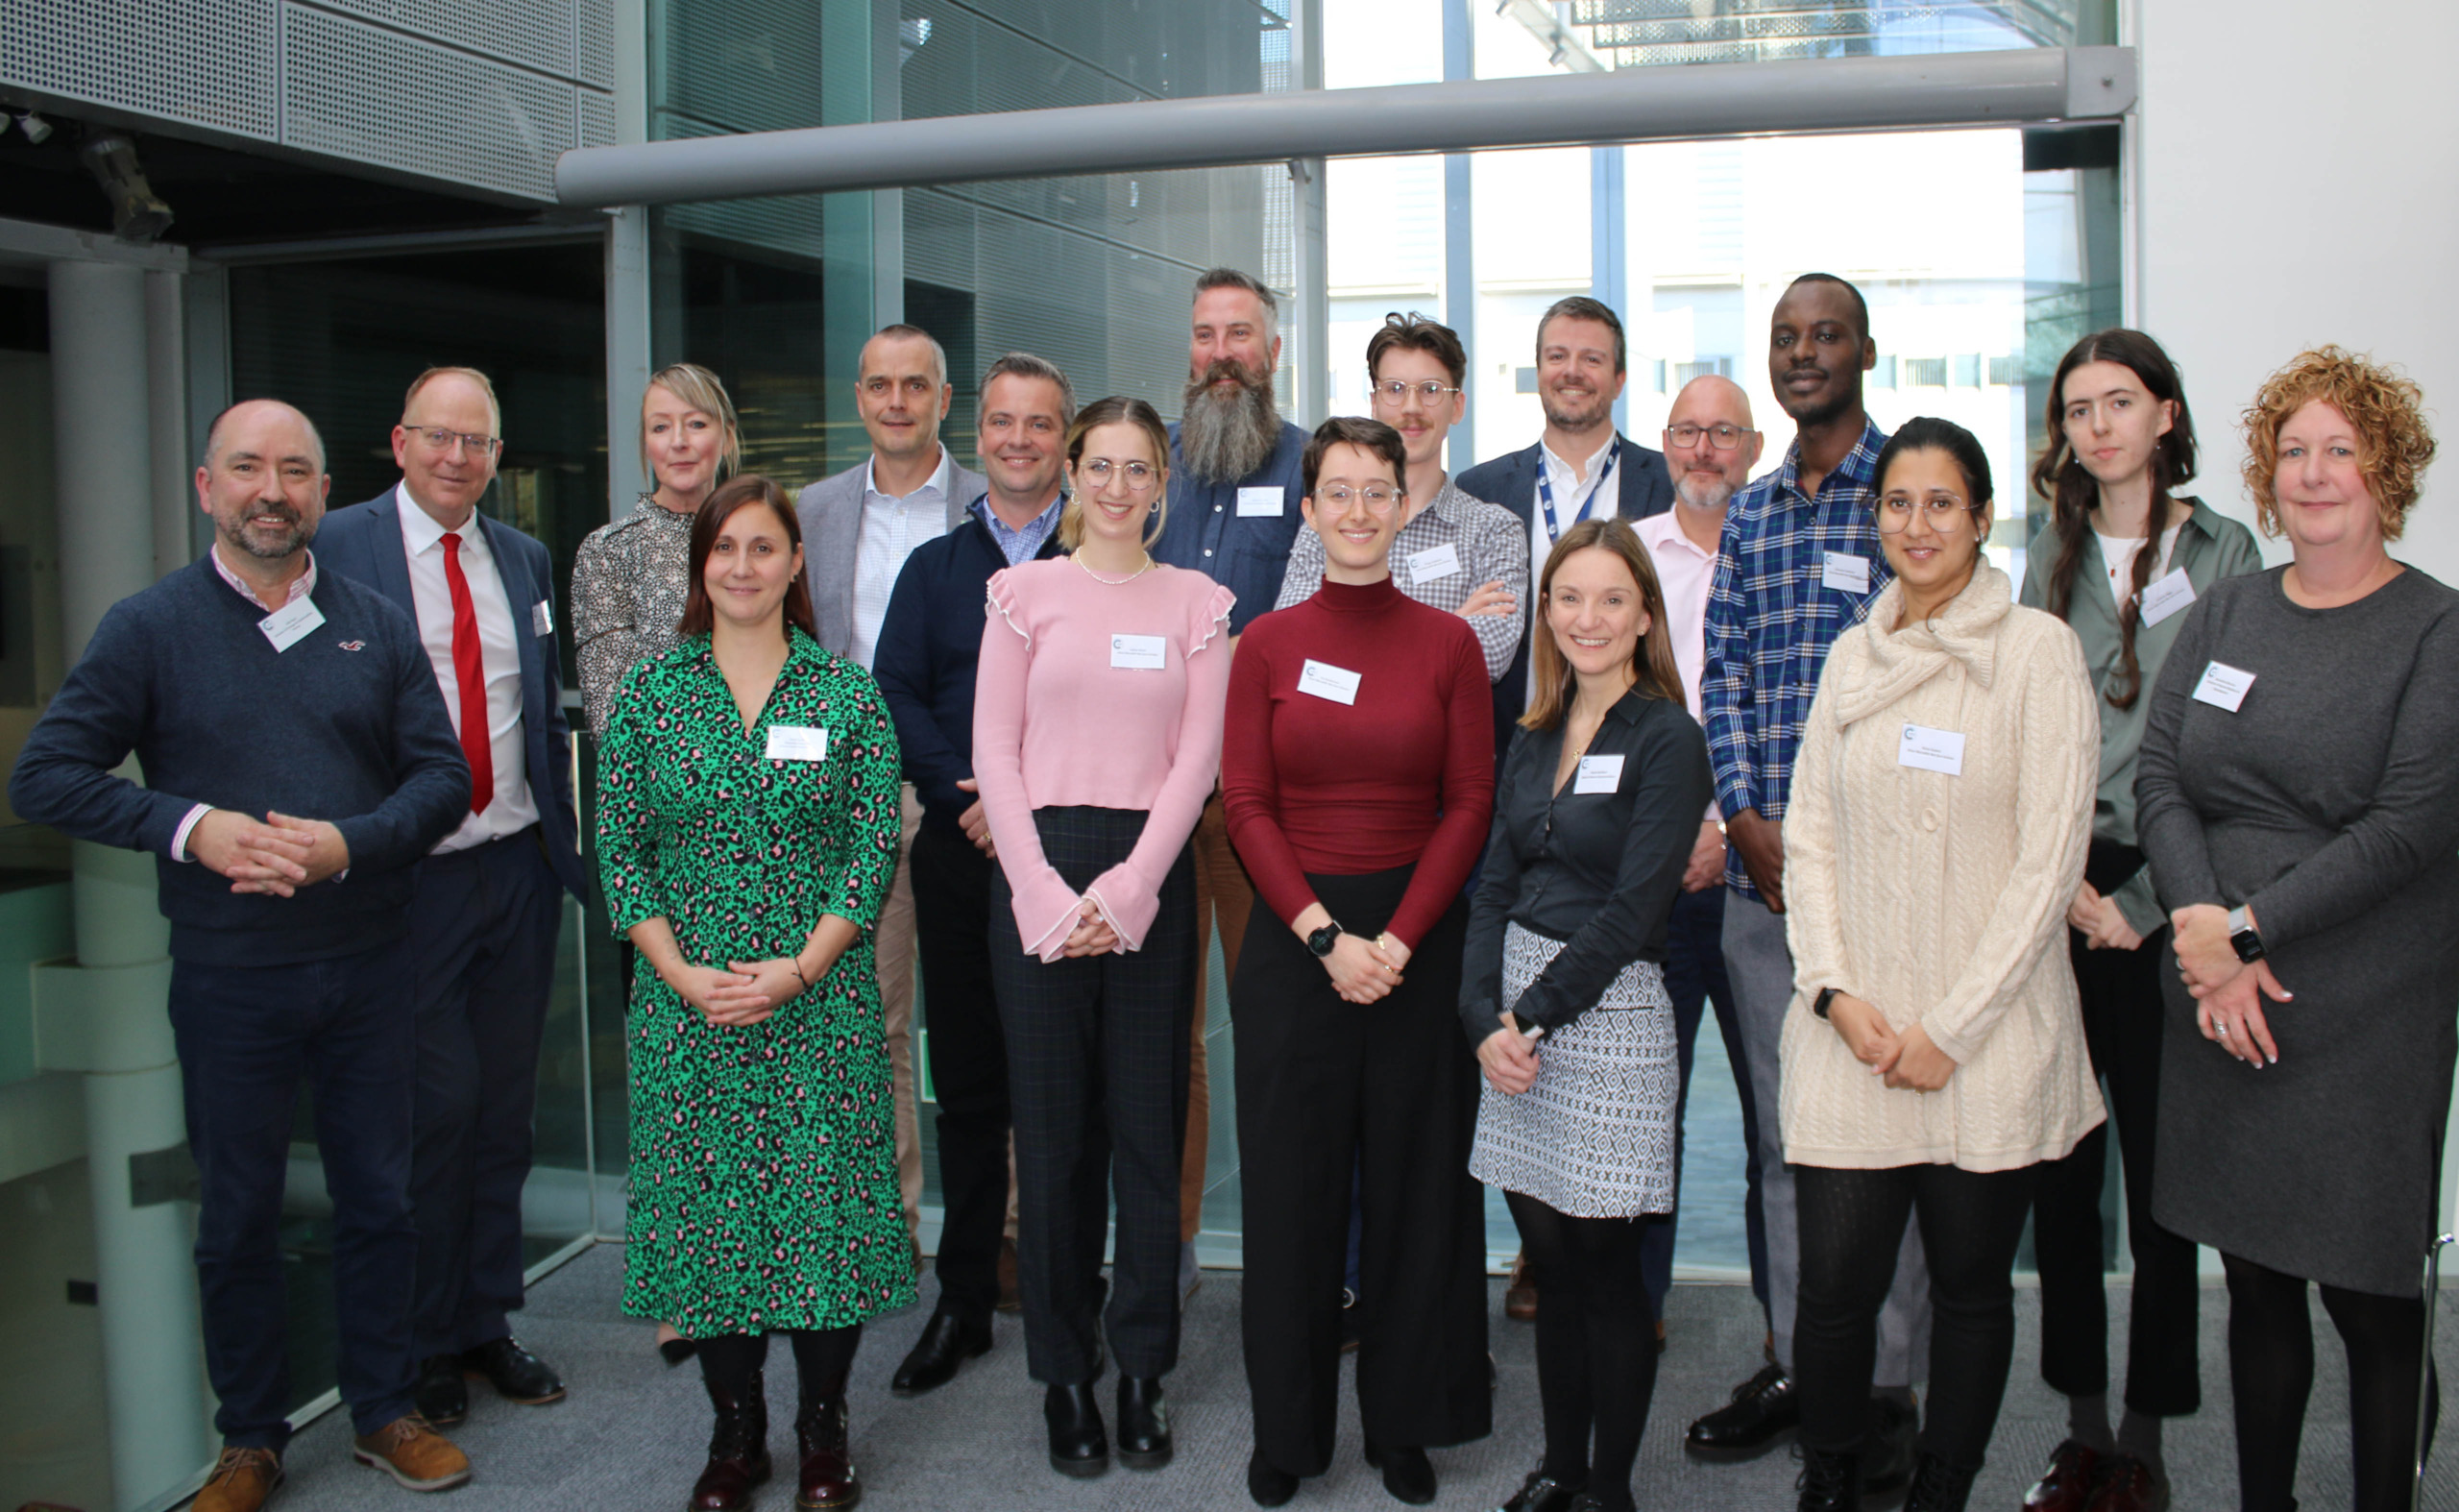 BM Scholars join GFIL and Cranfield staff at the launch